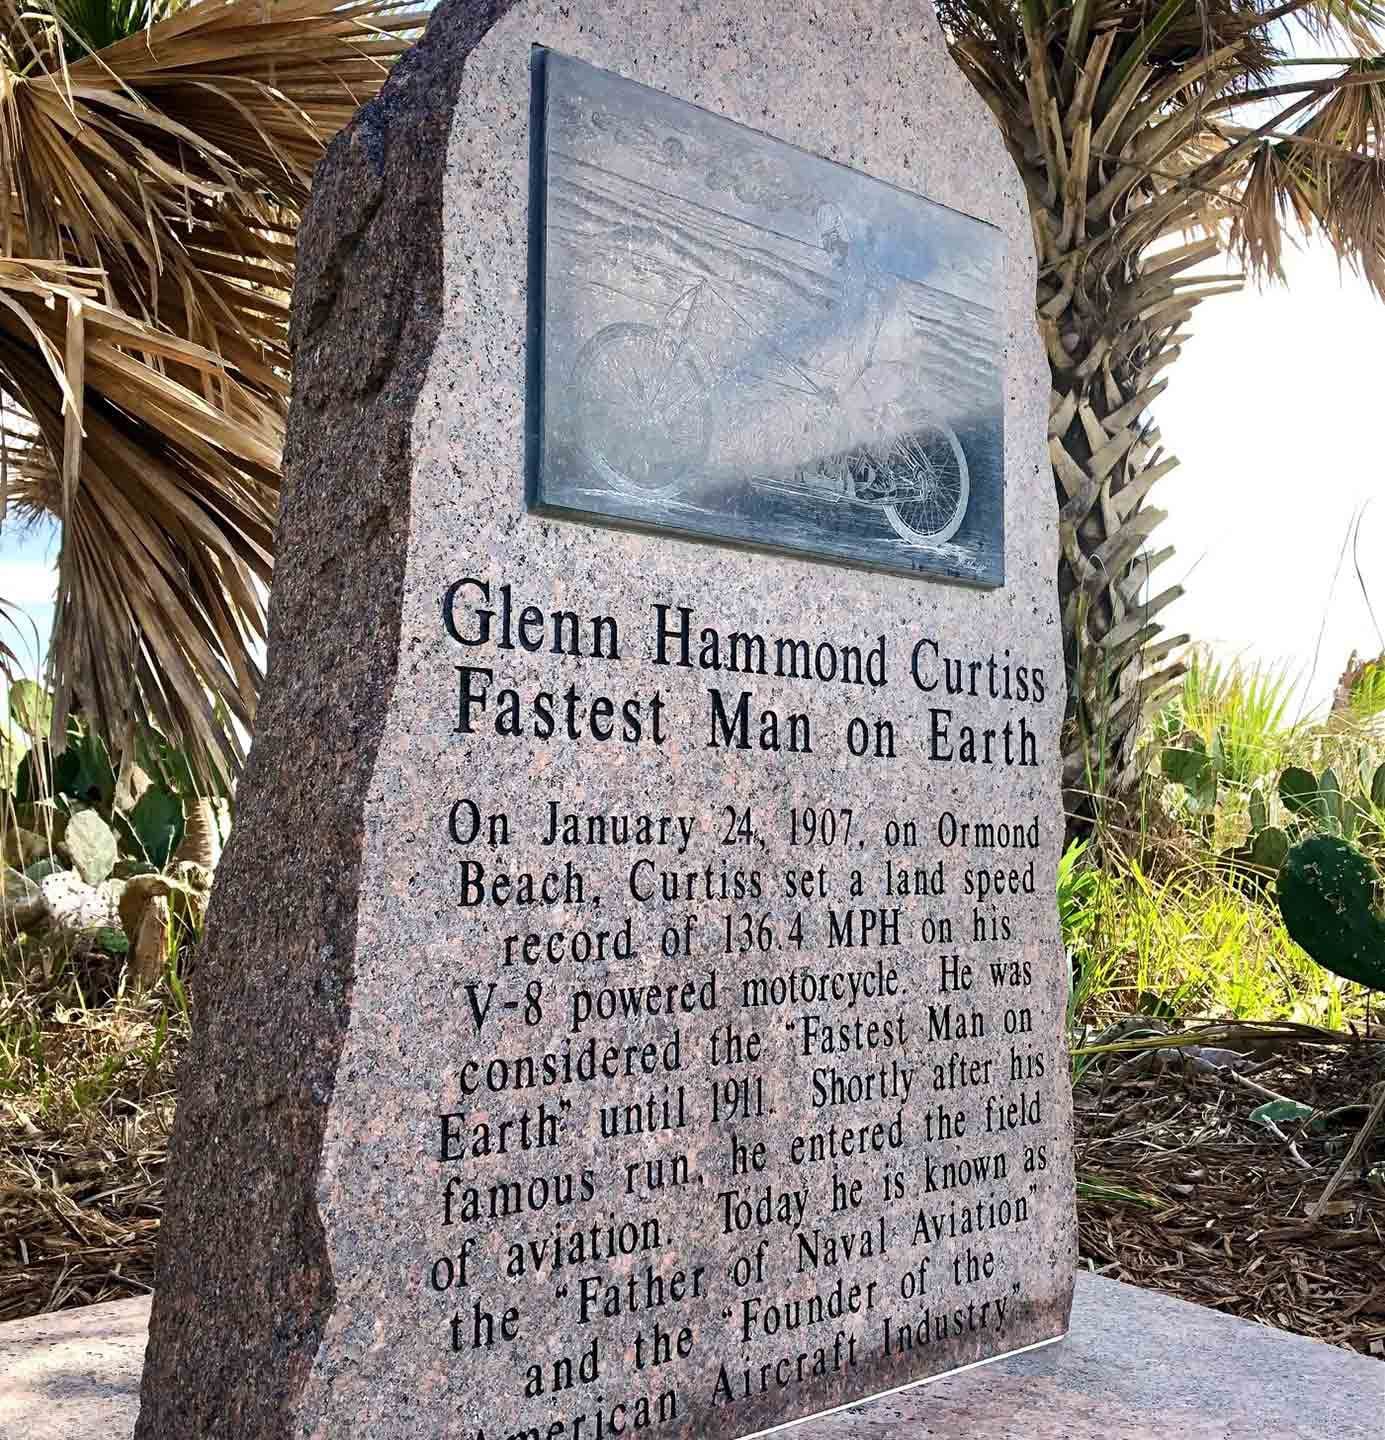 One of those history makers was Glenn Hammond Curtiss, who set a land-speed record in 1907 on a V-8-powered motorcycle. (Current-day luxury motorcycle brand Curtiss Motorcycle Co. is allegedly named in his honor, though it makes electric bikes.)